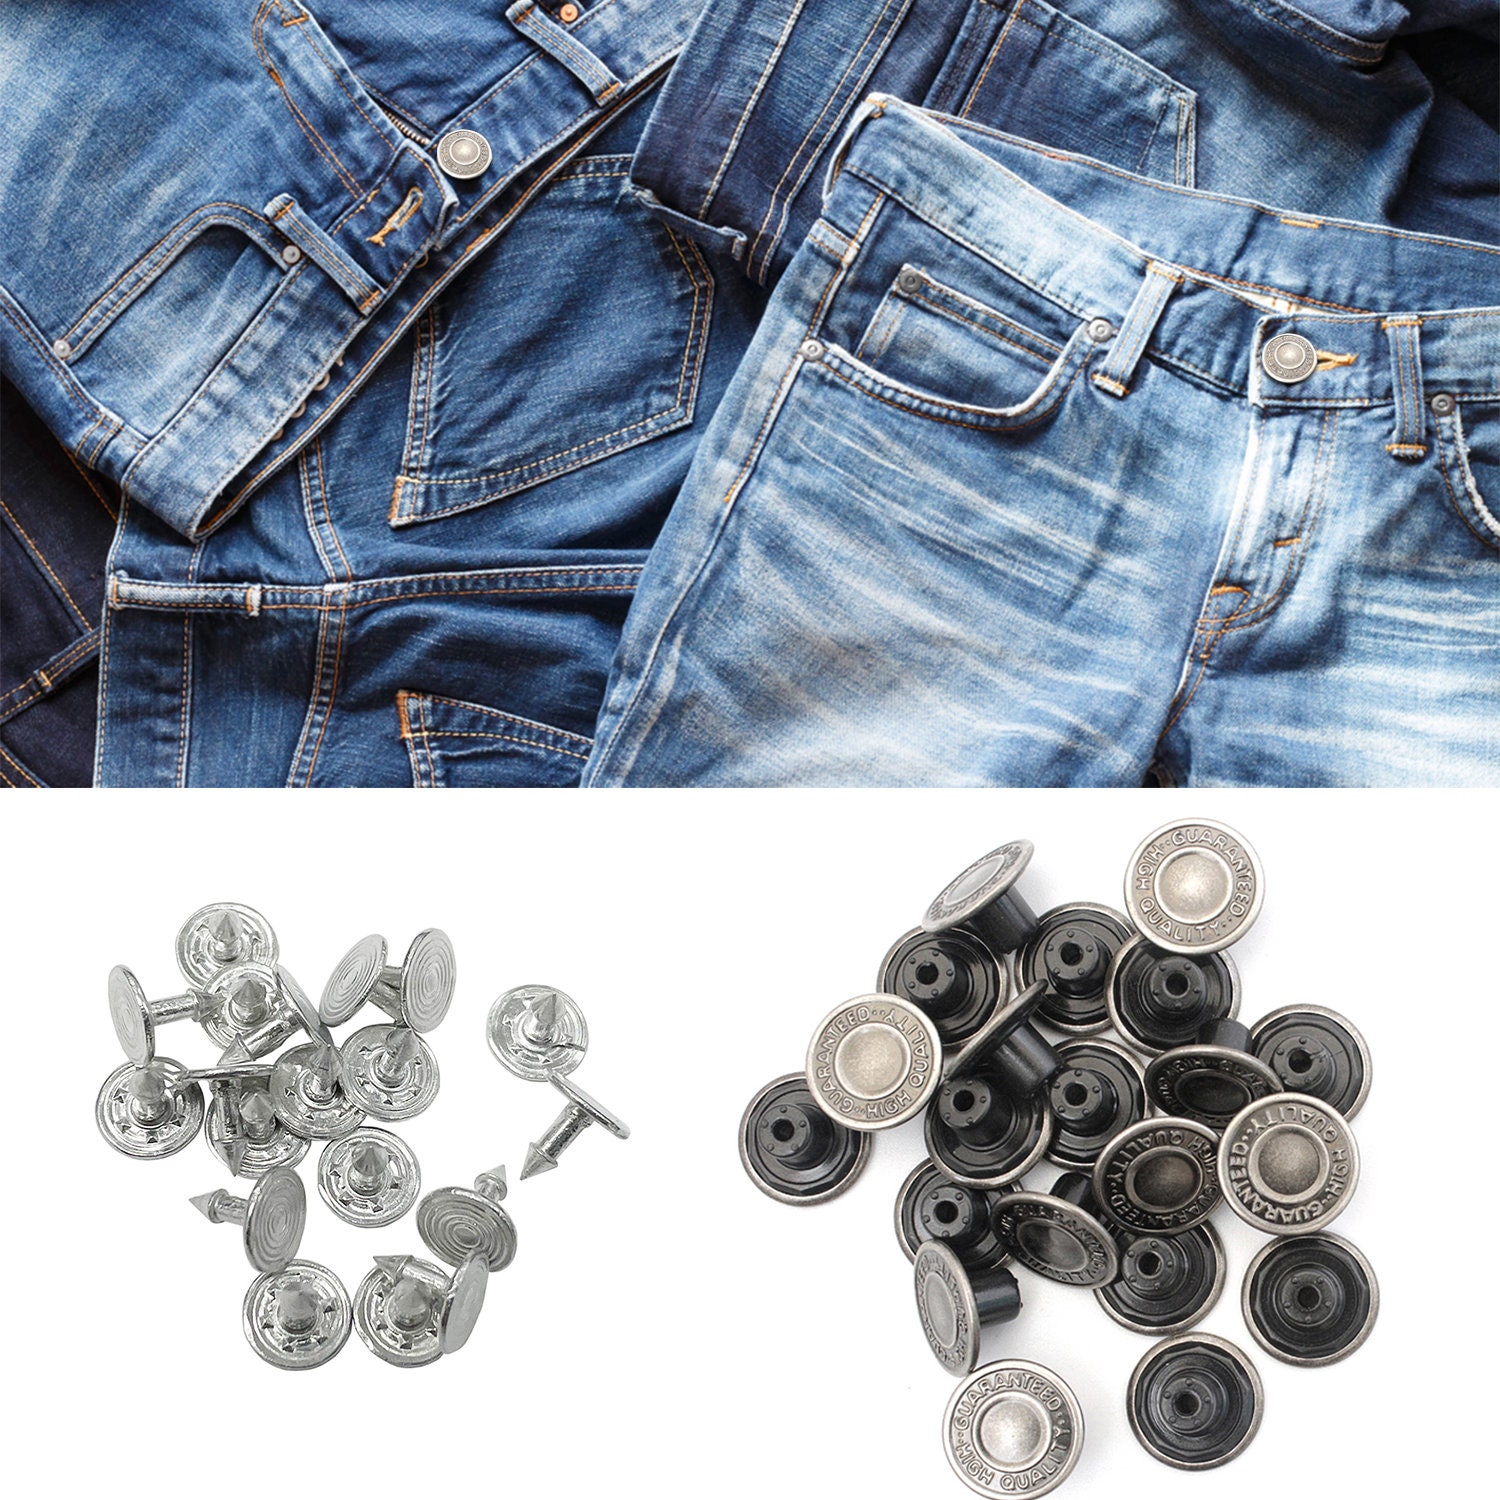 Jean Buttons Kit Metal Tack Buttons with Install Tools Jeans Button  Replacement 30 Sets 17 mm for DIY Customize Jeans Jackets Pants Trousers  Clothes